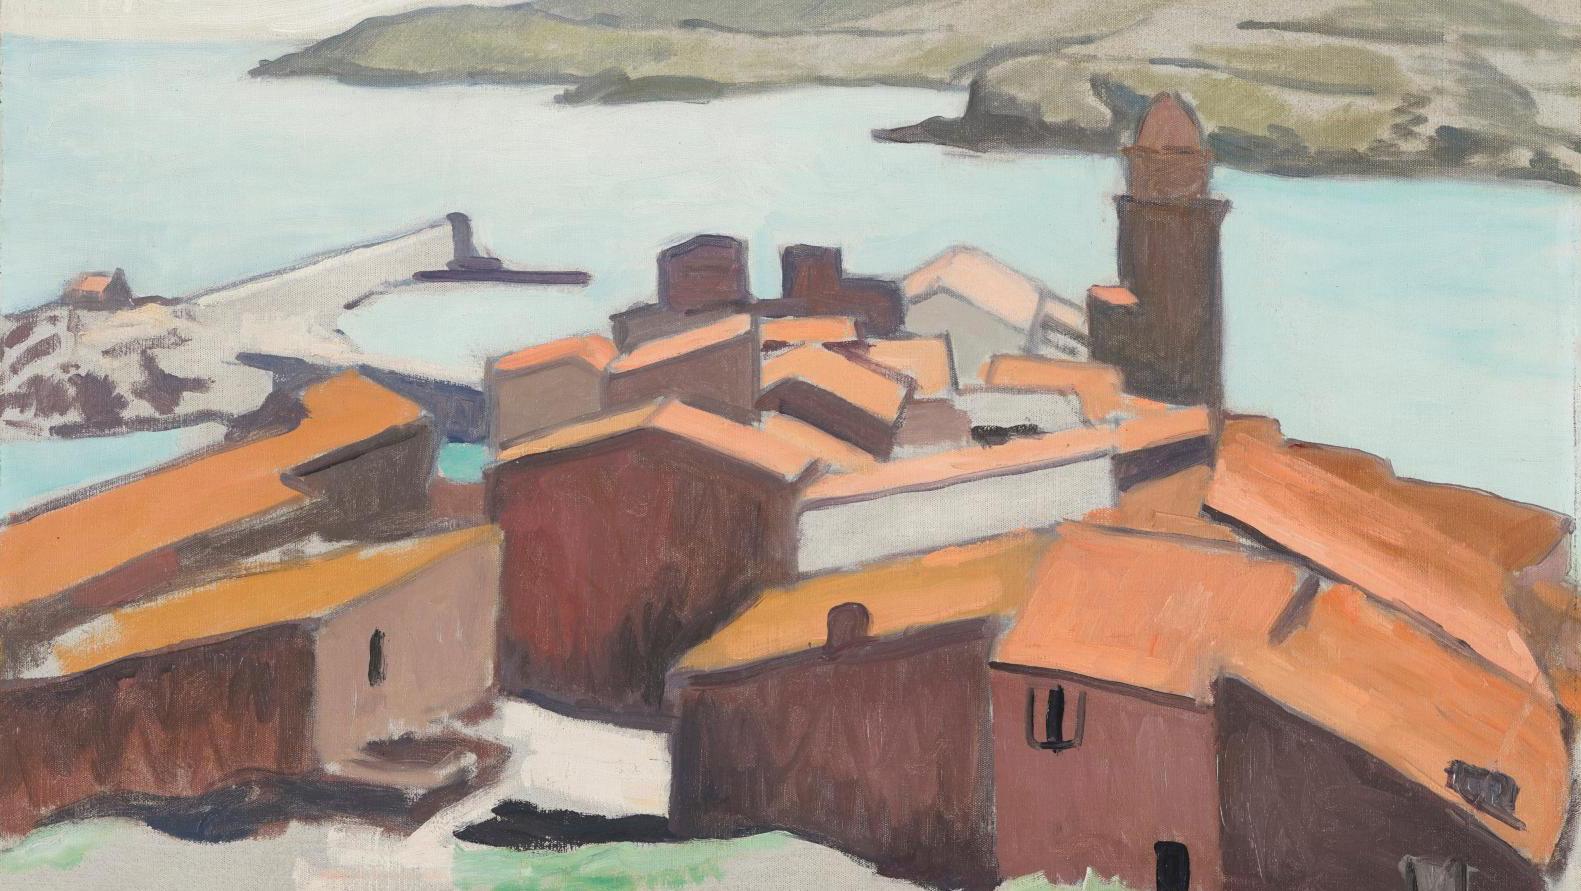 Albert Marquet (1975-1947), Collioure, 1912, oil on canvas, 65 x 61 cm/25.6 x 24... From Marquet to Buffet: A Collection Full of Provencal Sunshine